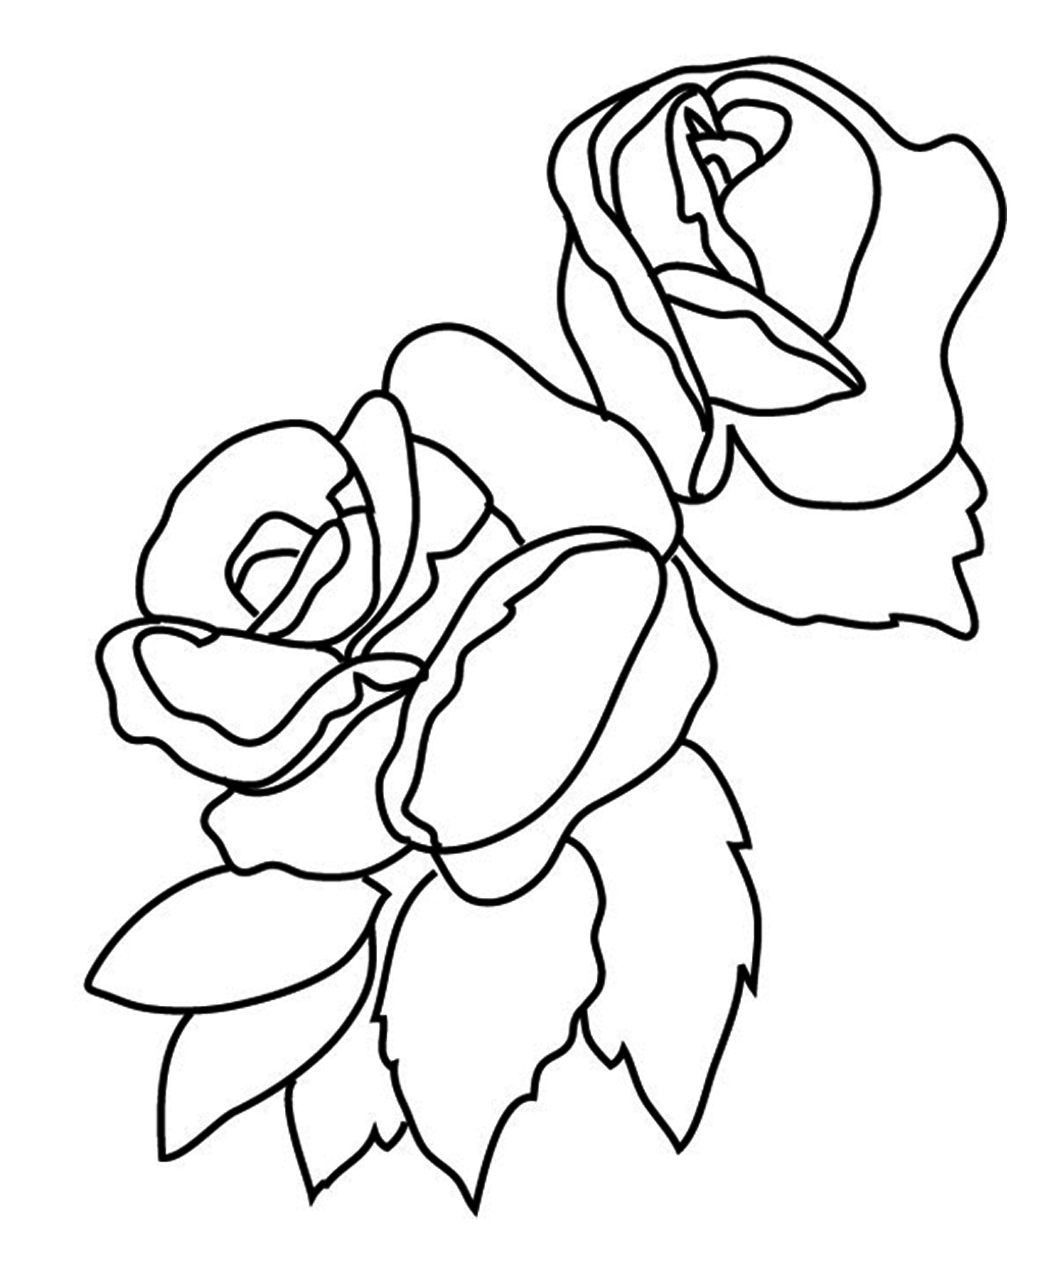 images of roses for coloring book pages - photo #50